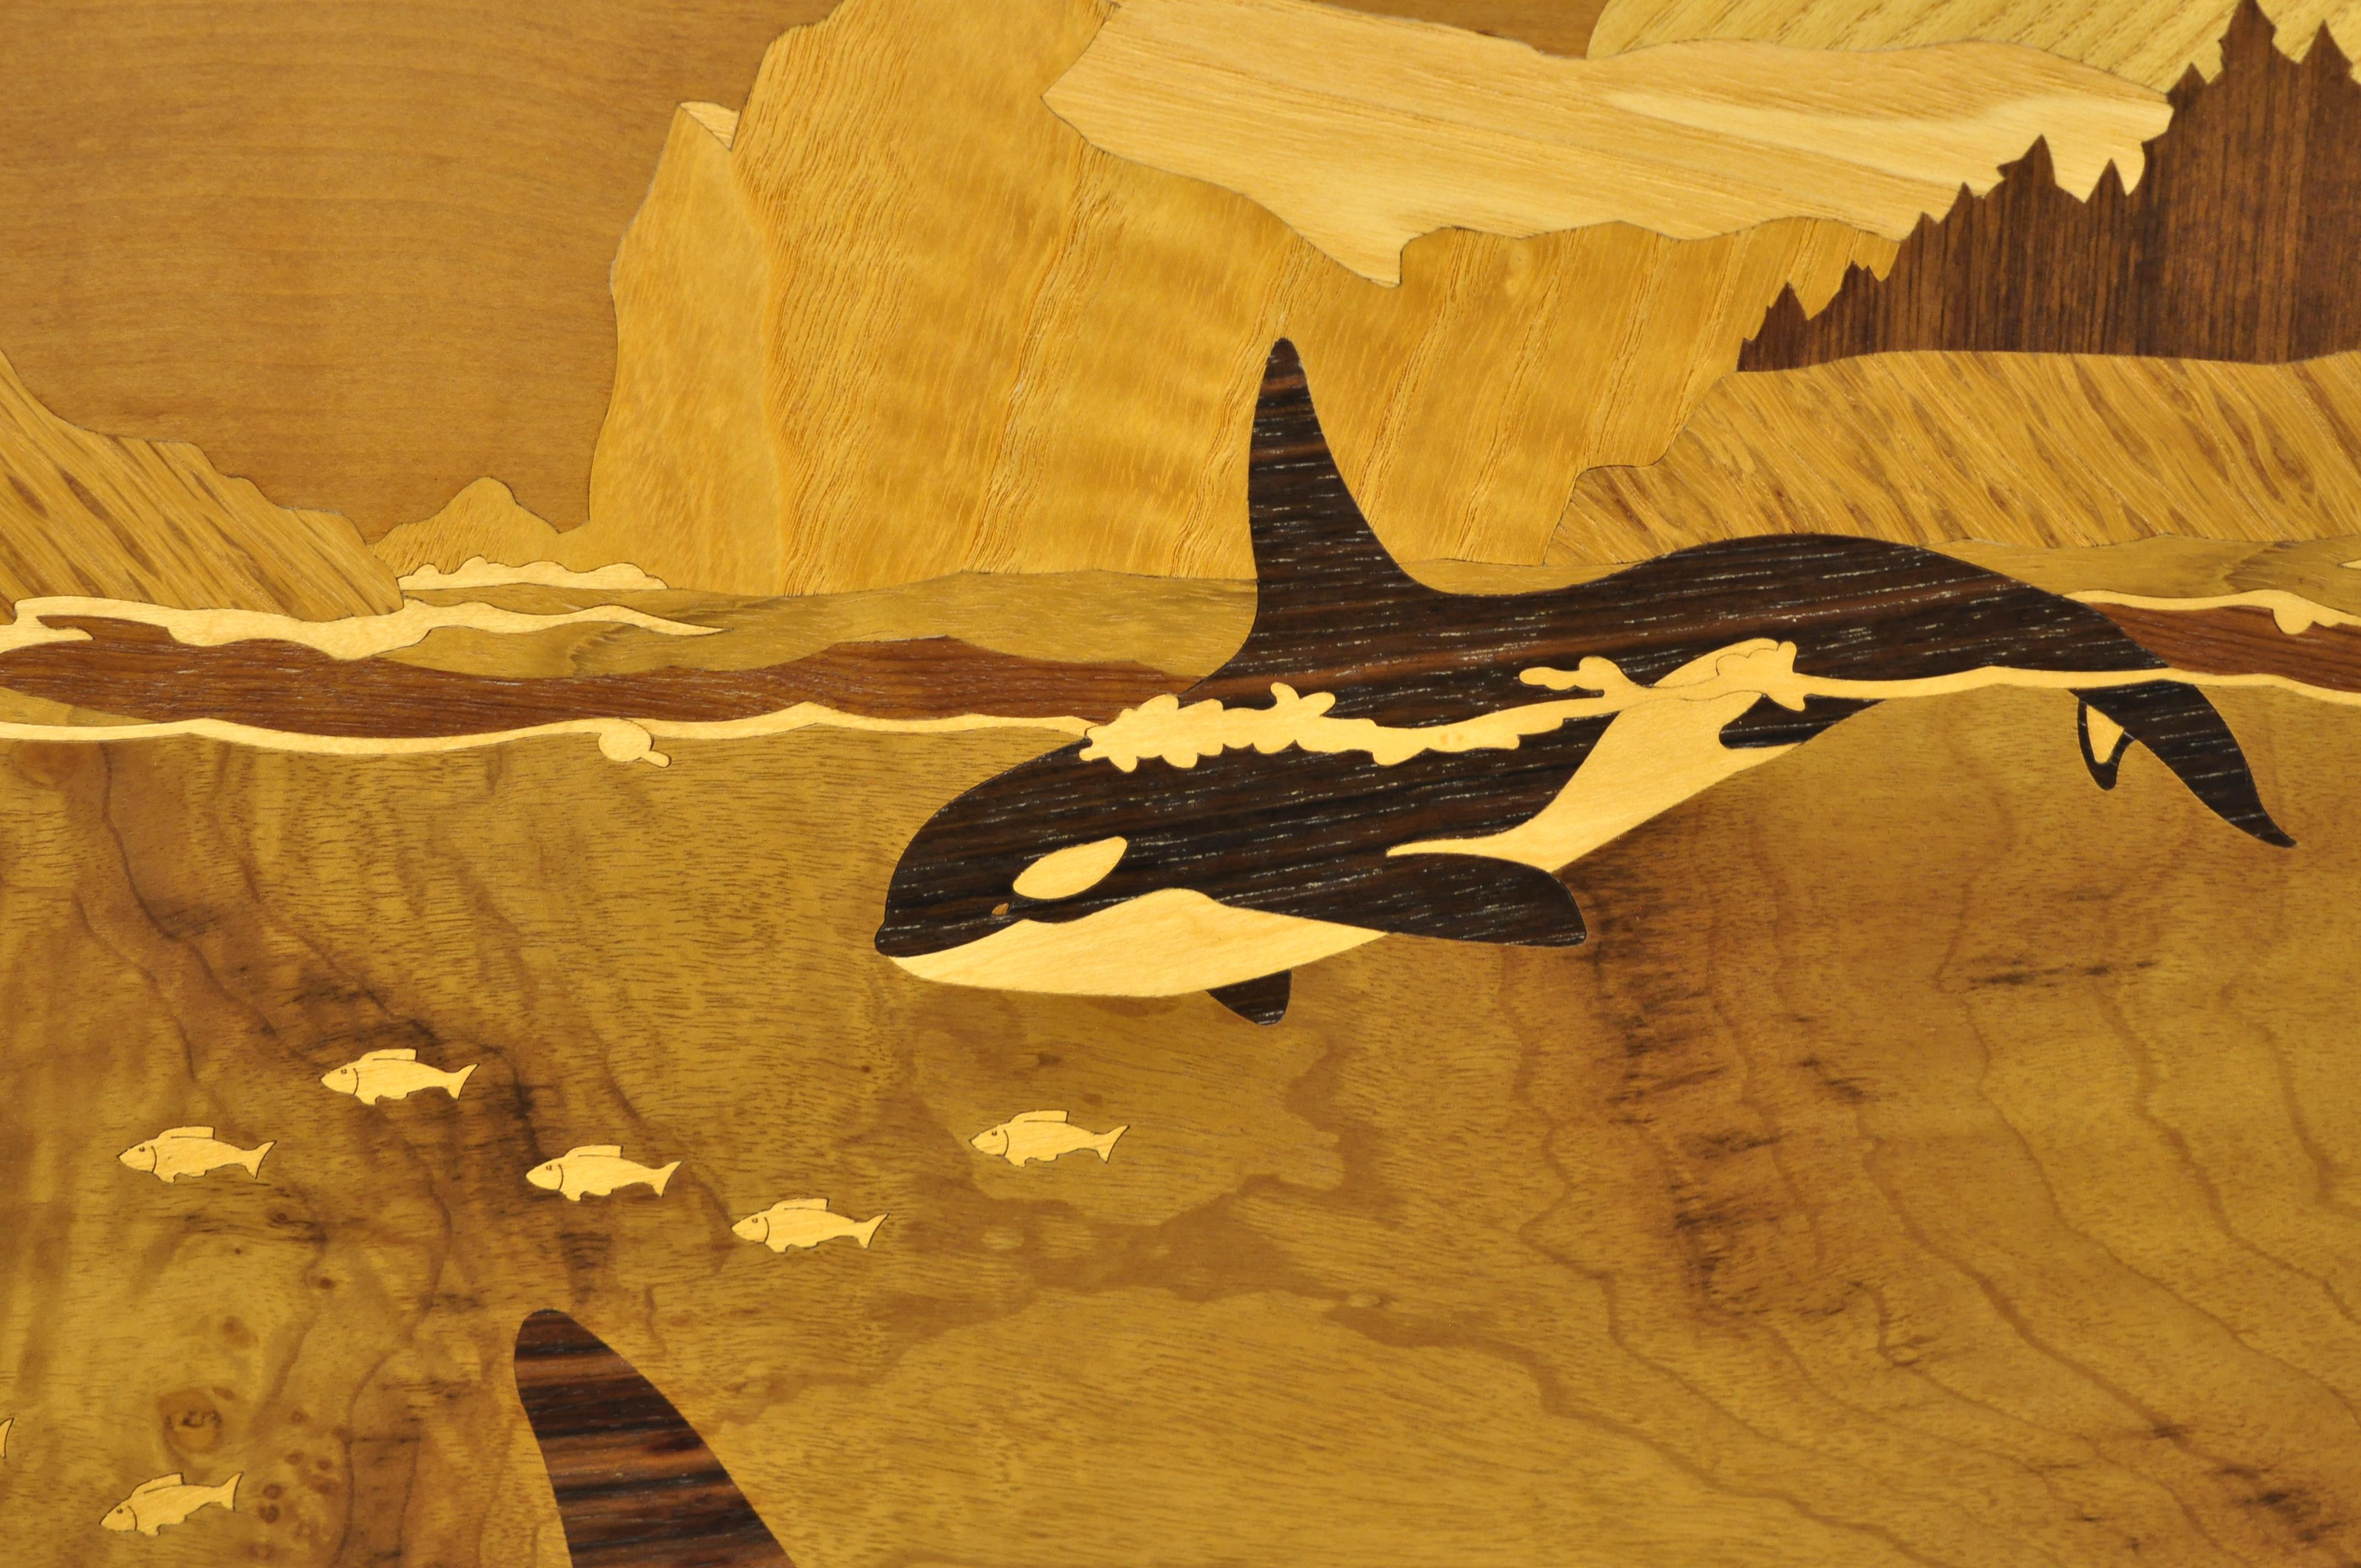 20th Century Hudson River Inlay Orcas Killer Whales Nature Sea Marquetry Inlaid Wall Artwork